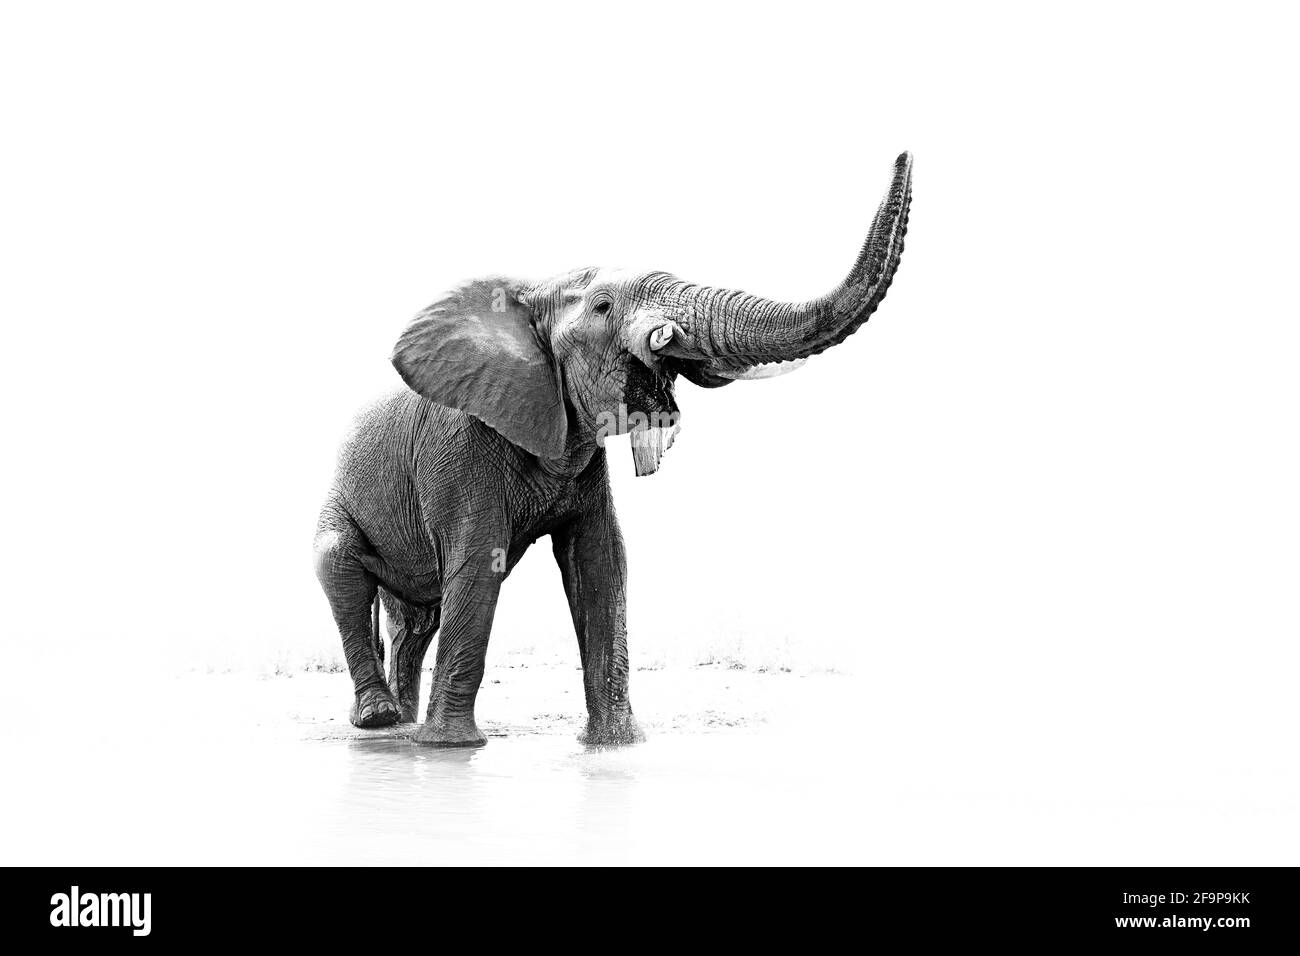 African elephant, monochrome side view with outstretched trunk